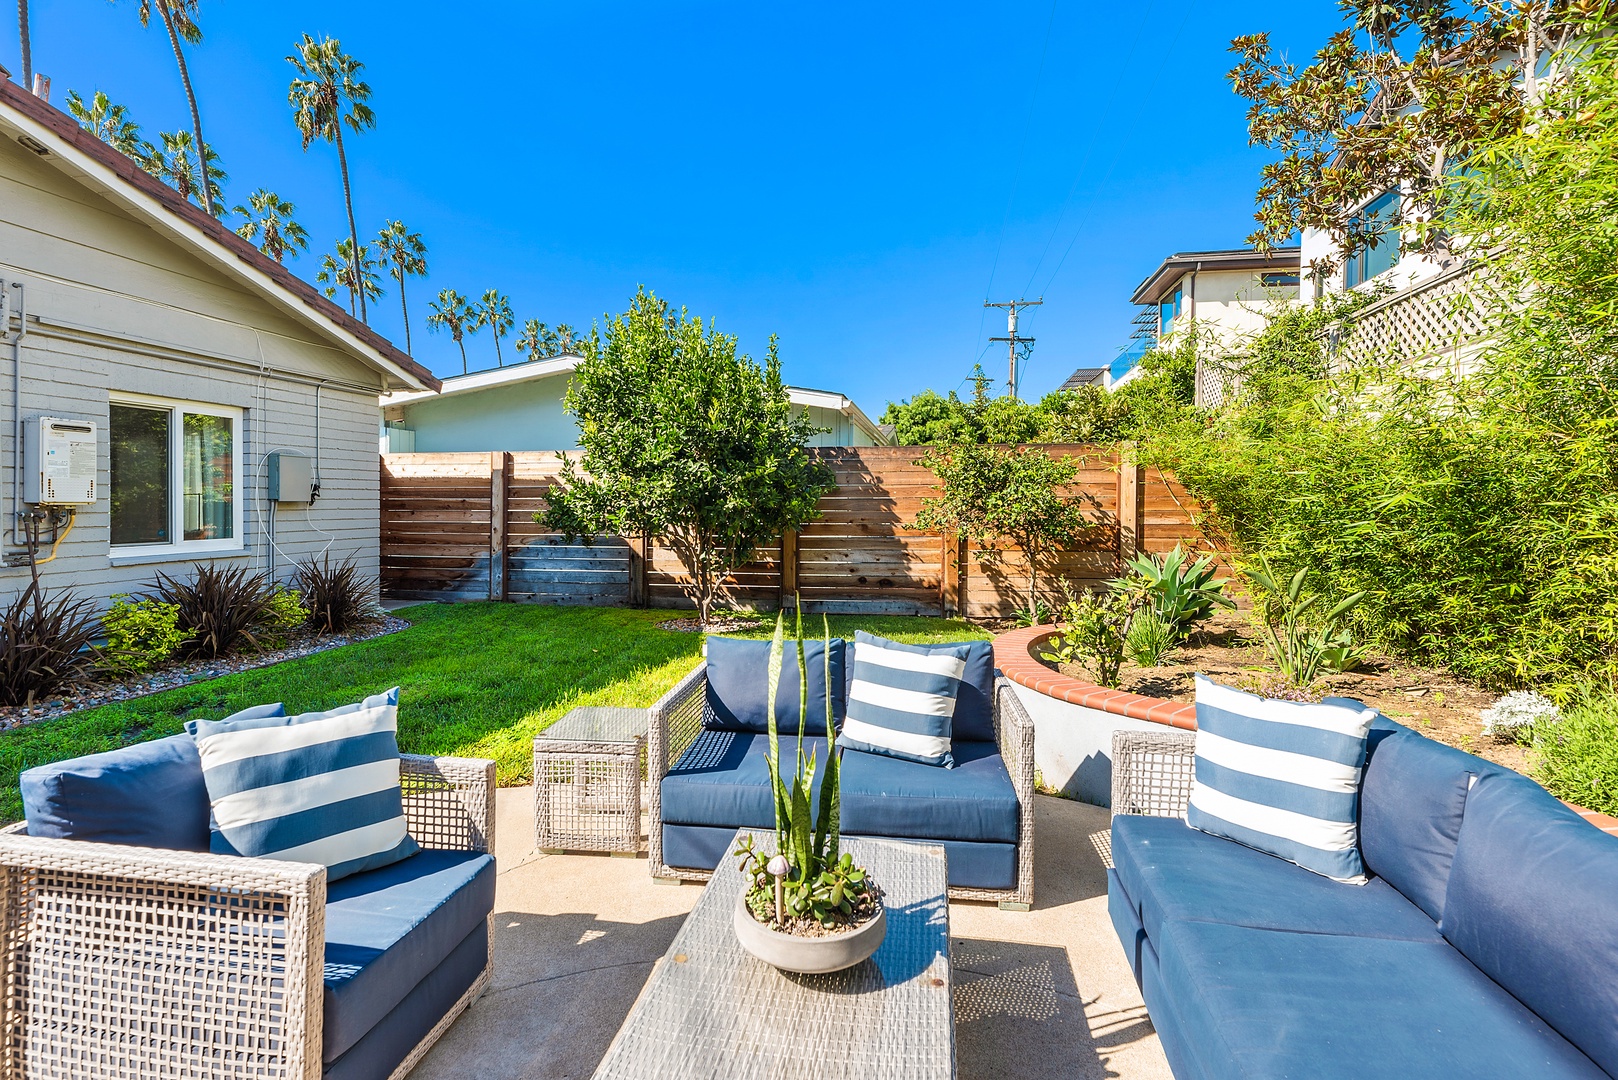 La Jolla Vacation Rentals, Hemingway's Beach House - Enjoy the private quite backyard with outdoor furniture